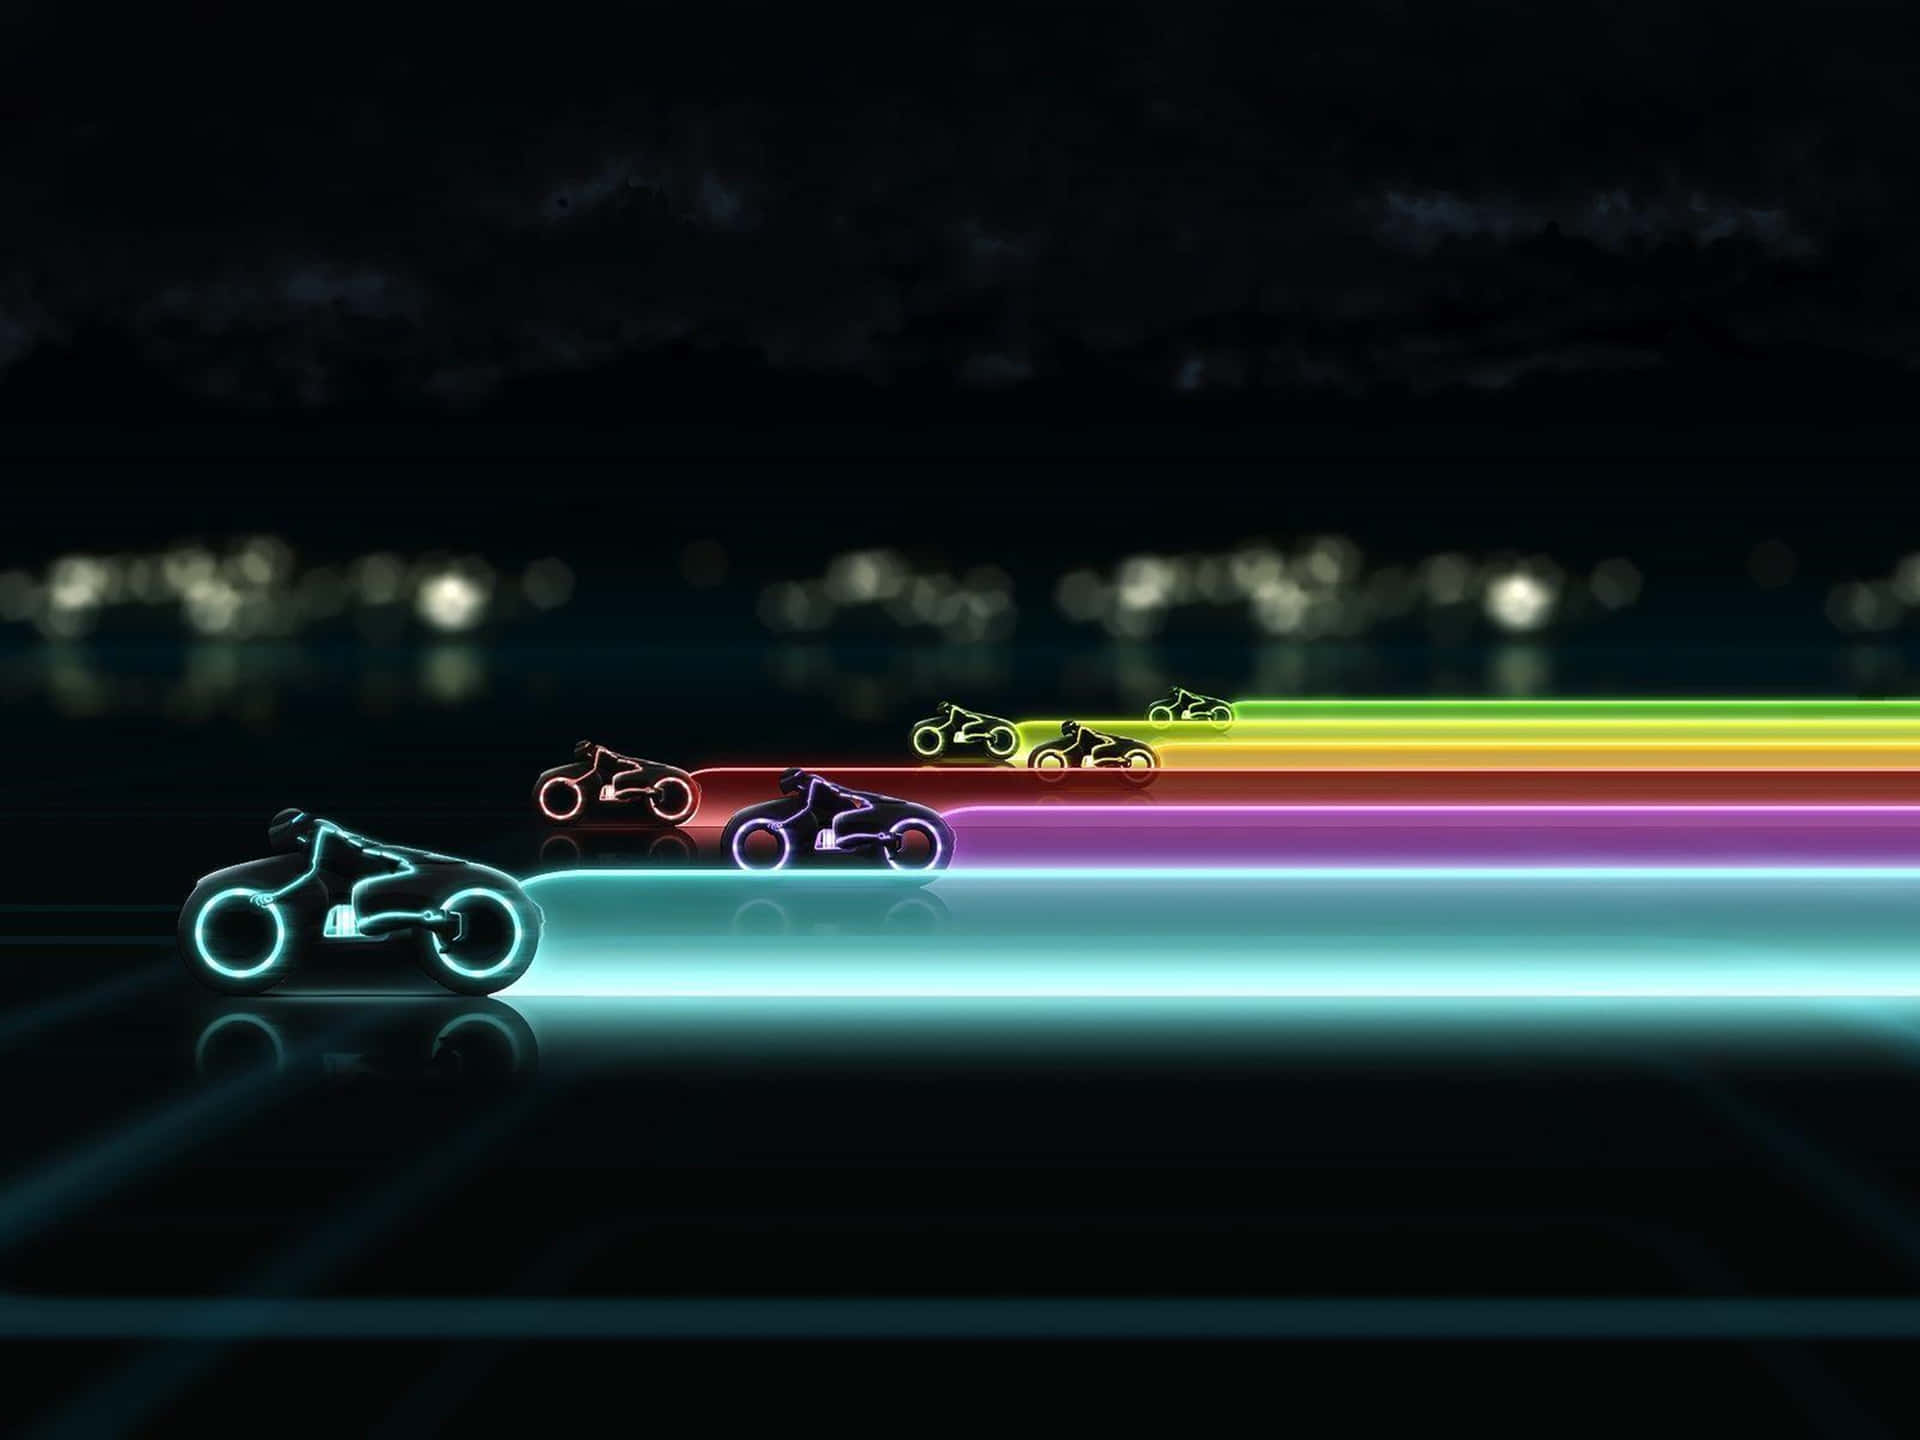 Take a ride in the Grid with Tron 4k Wallpaper